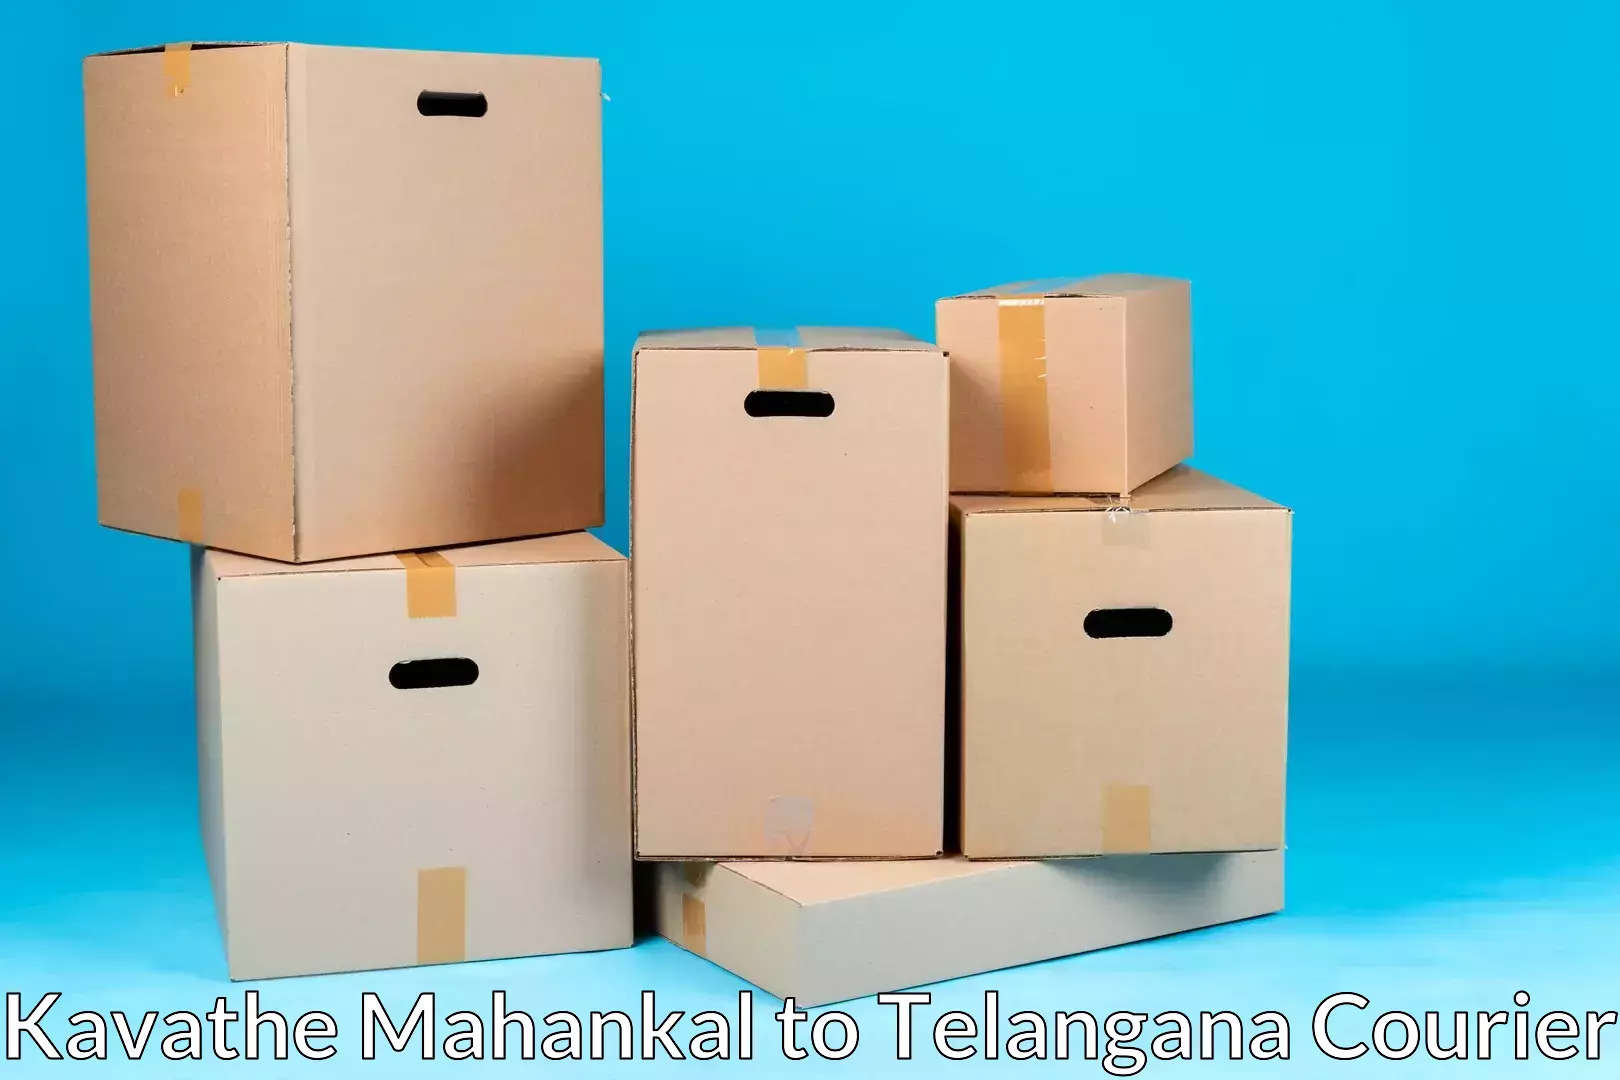 Affordable relocation services Kavathe Mahankal to Telangana